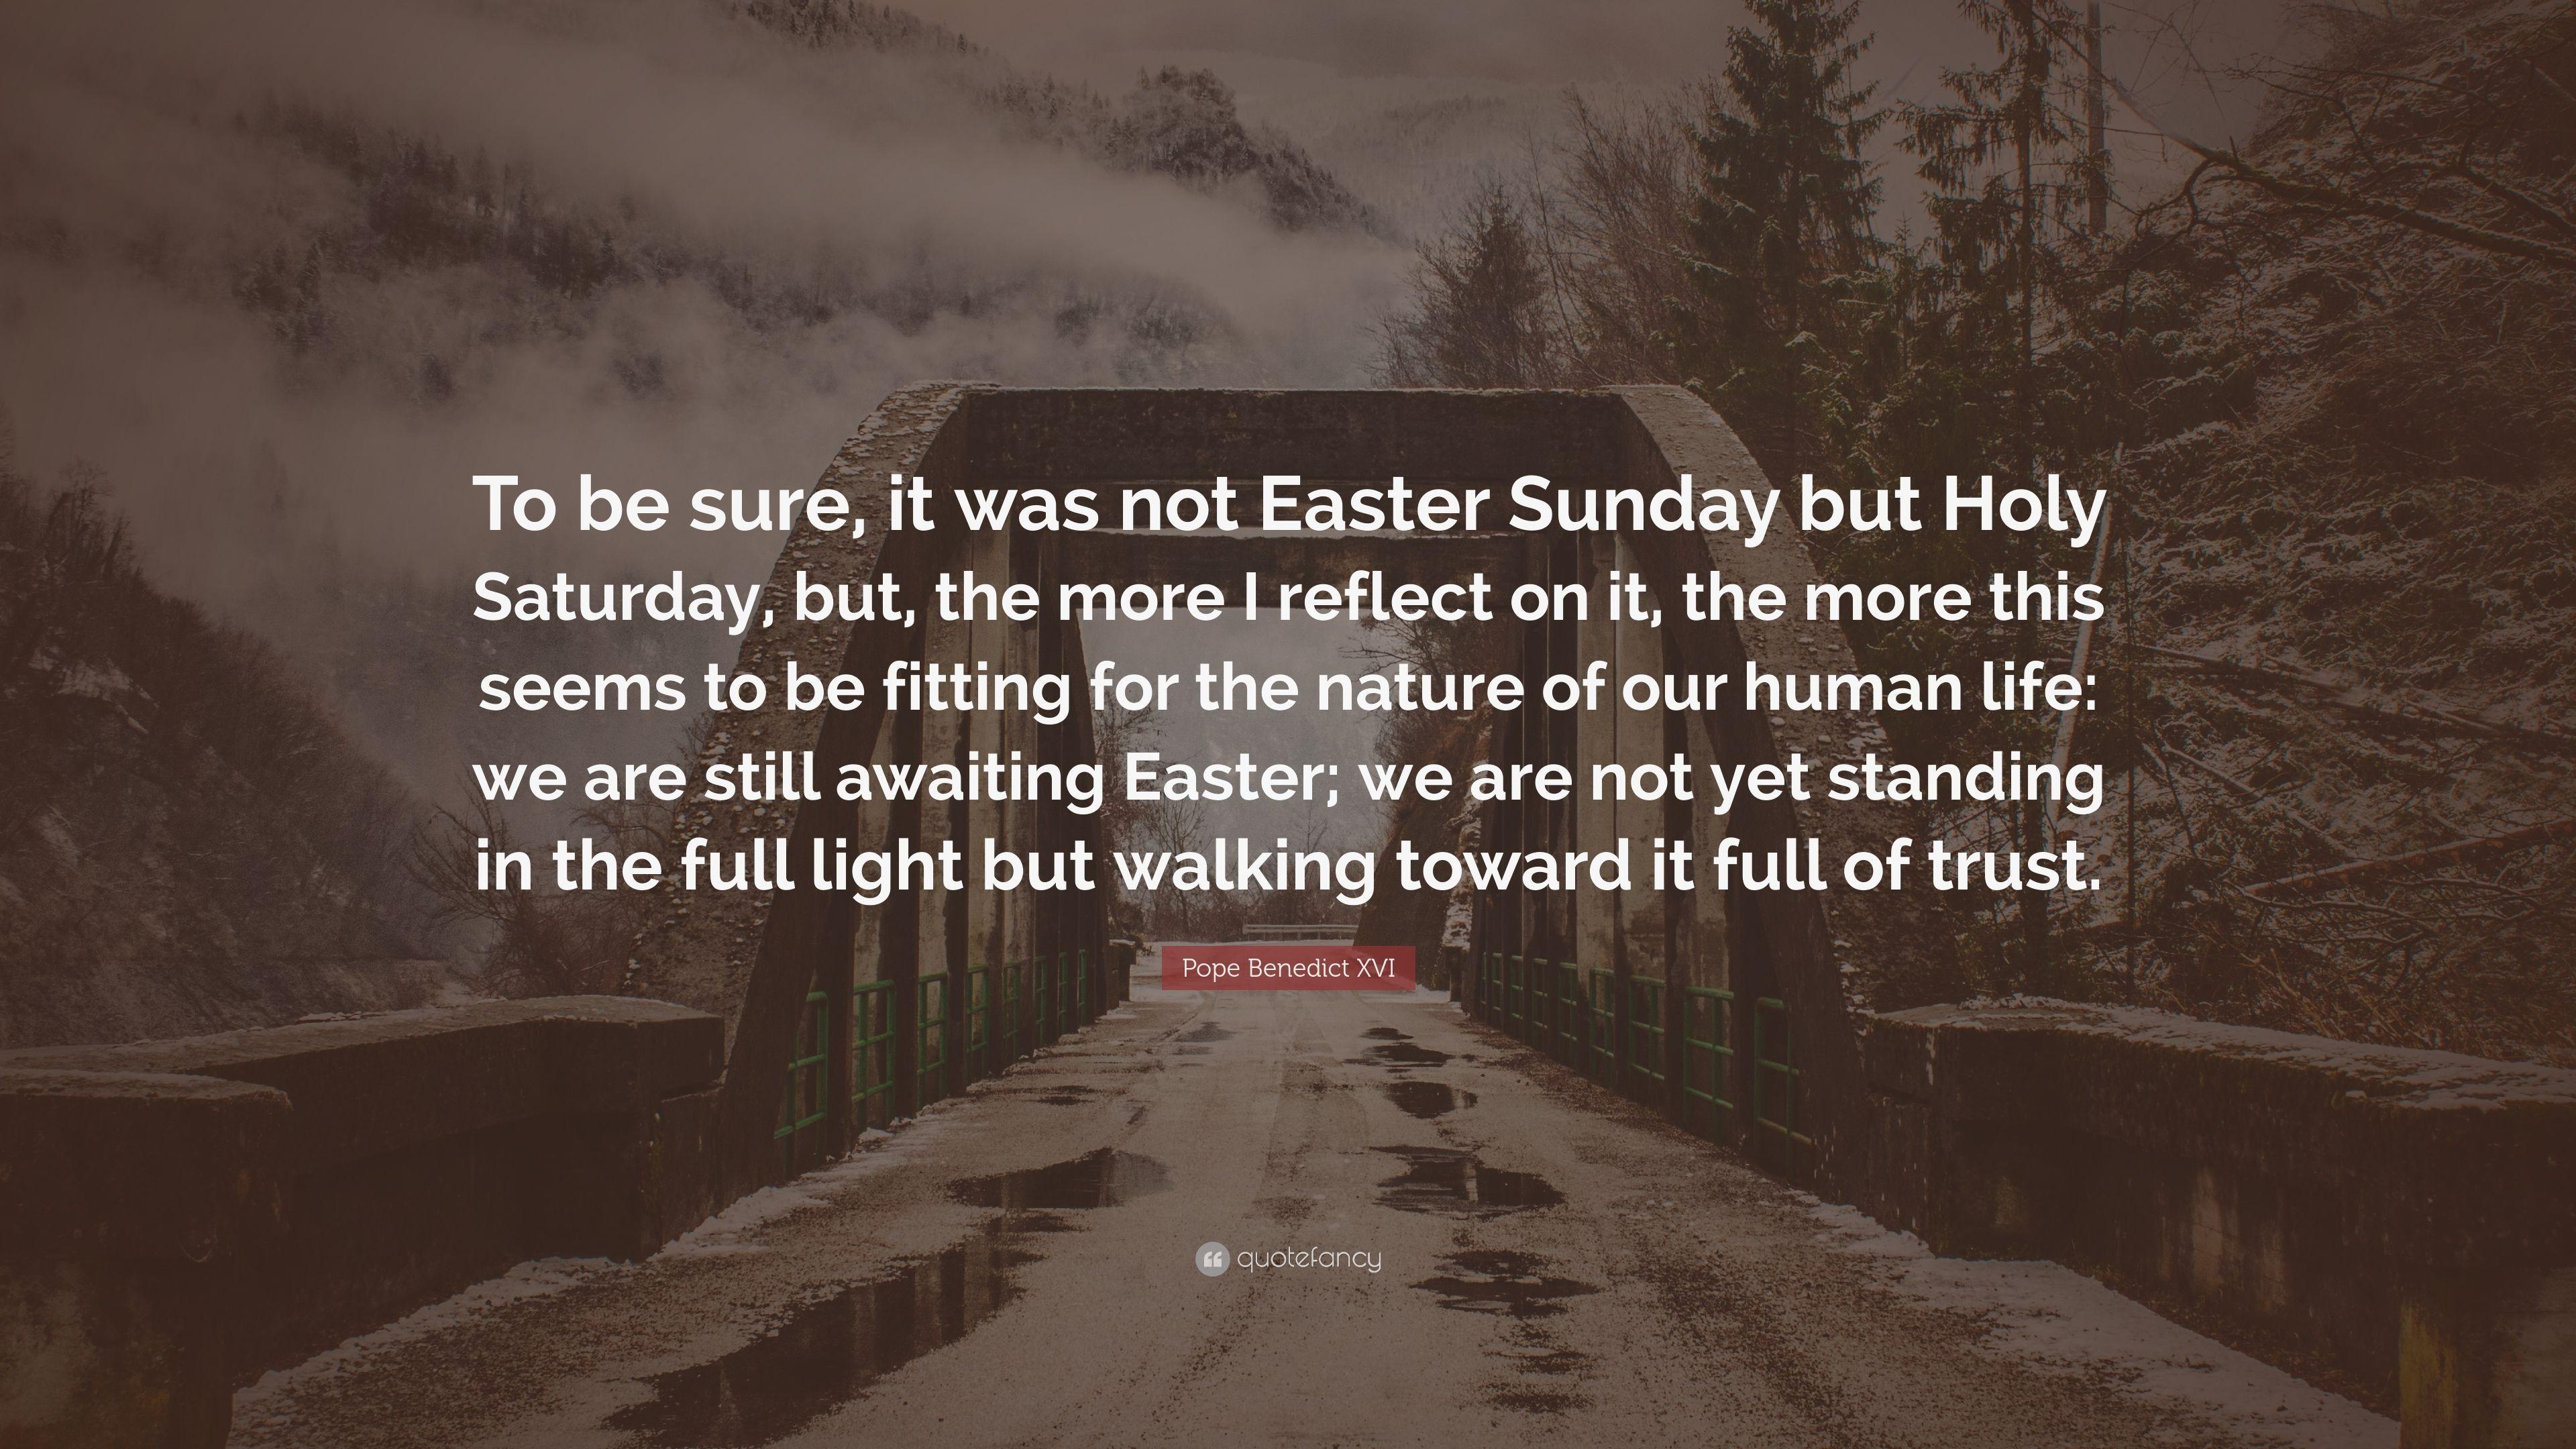 Pope Benedict XVI Quote: “To be sure, it was not Easter Sunday but